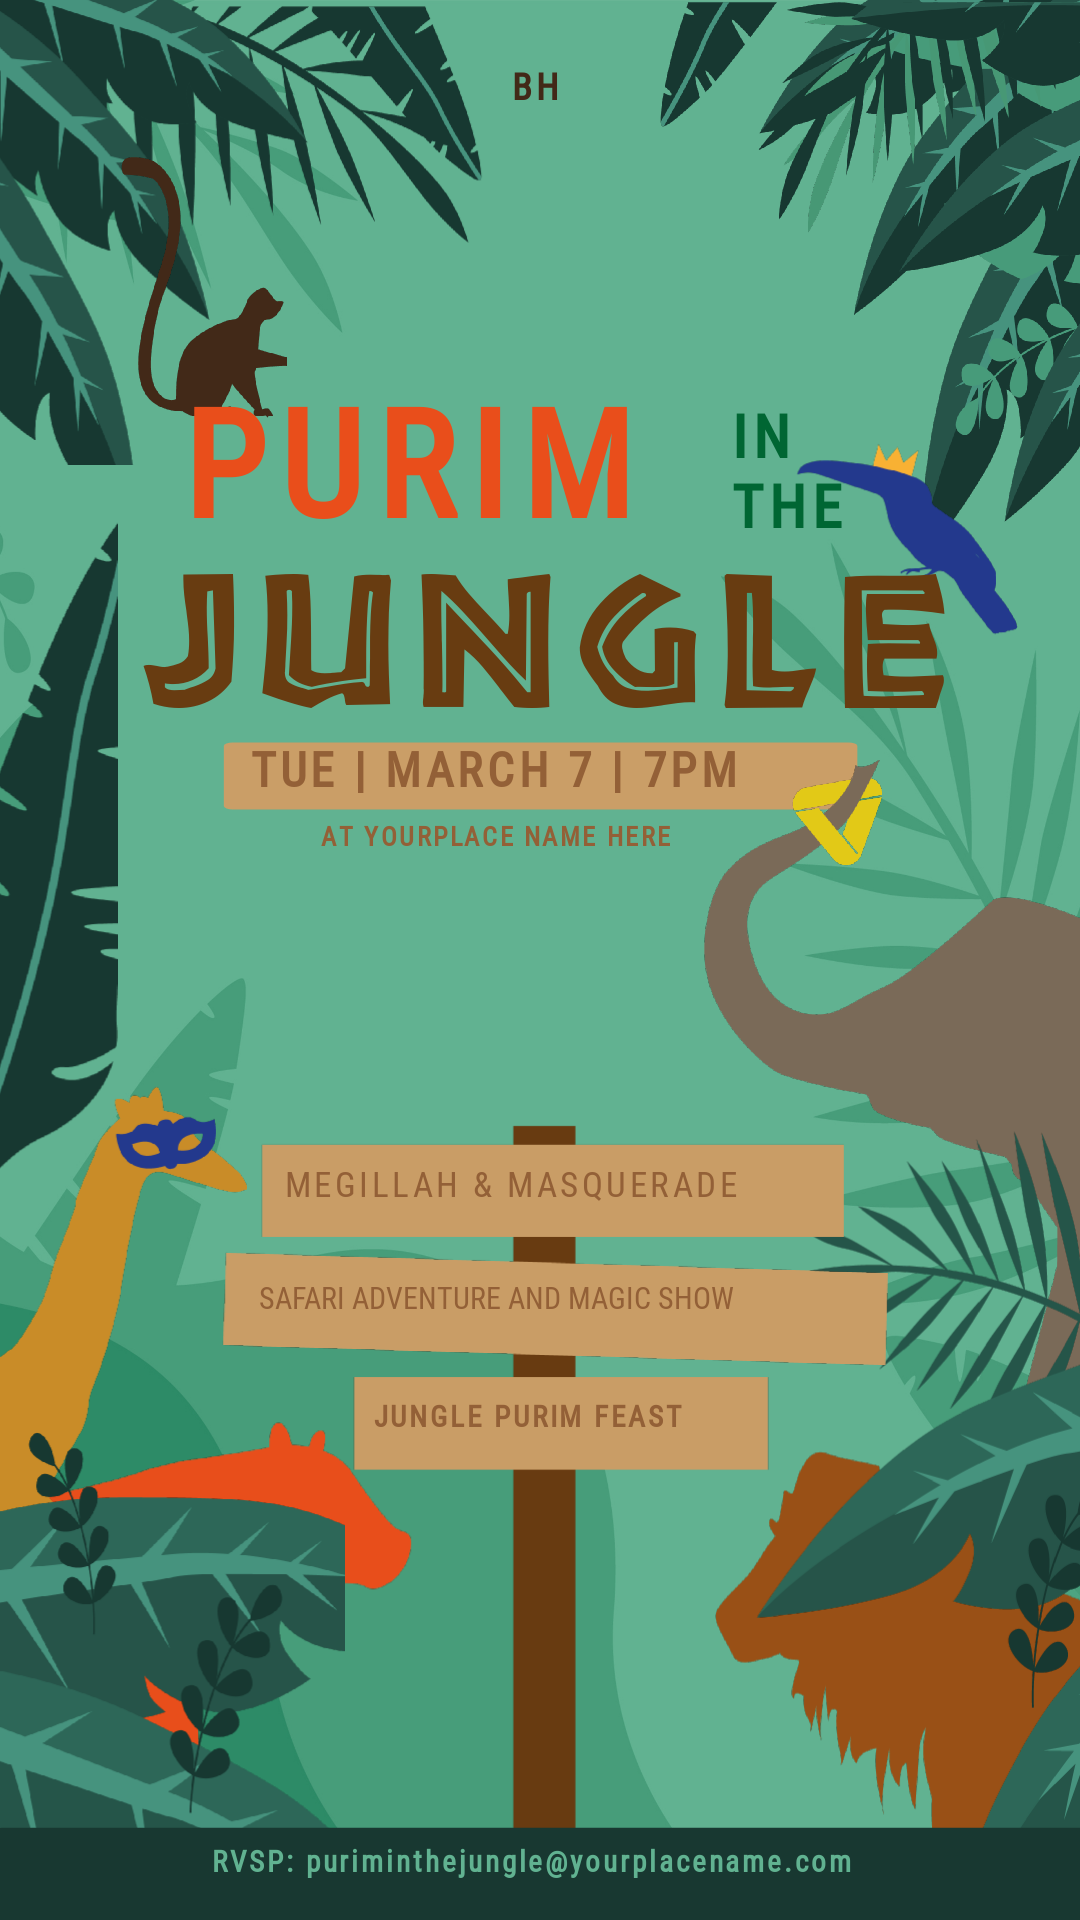 Purim in the jungle instagram story